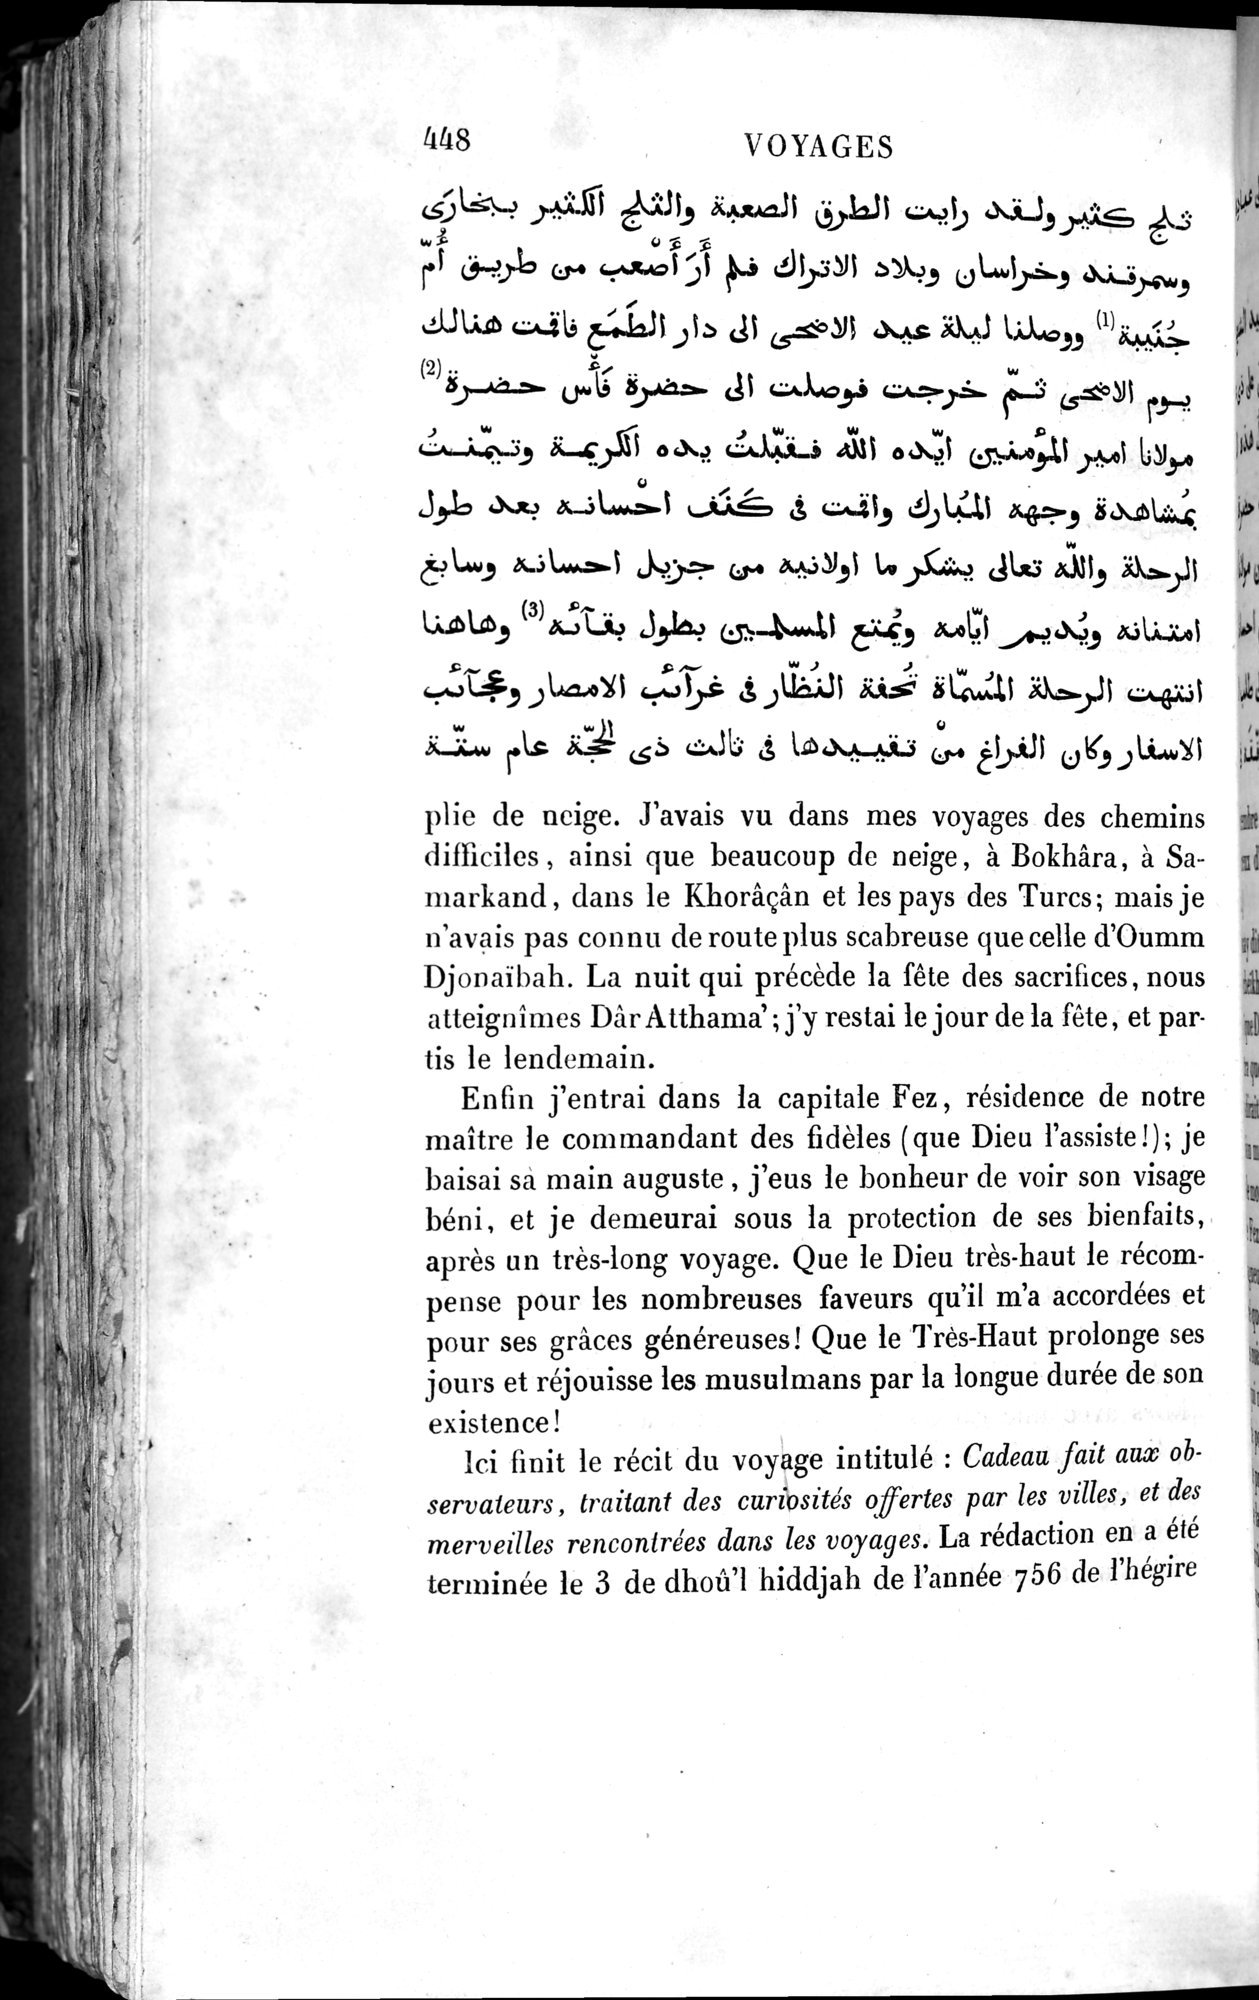 Voyages d'Ibn Batoutah : vol.4 / Page 460 (Grayscale High Resolution Image)